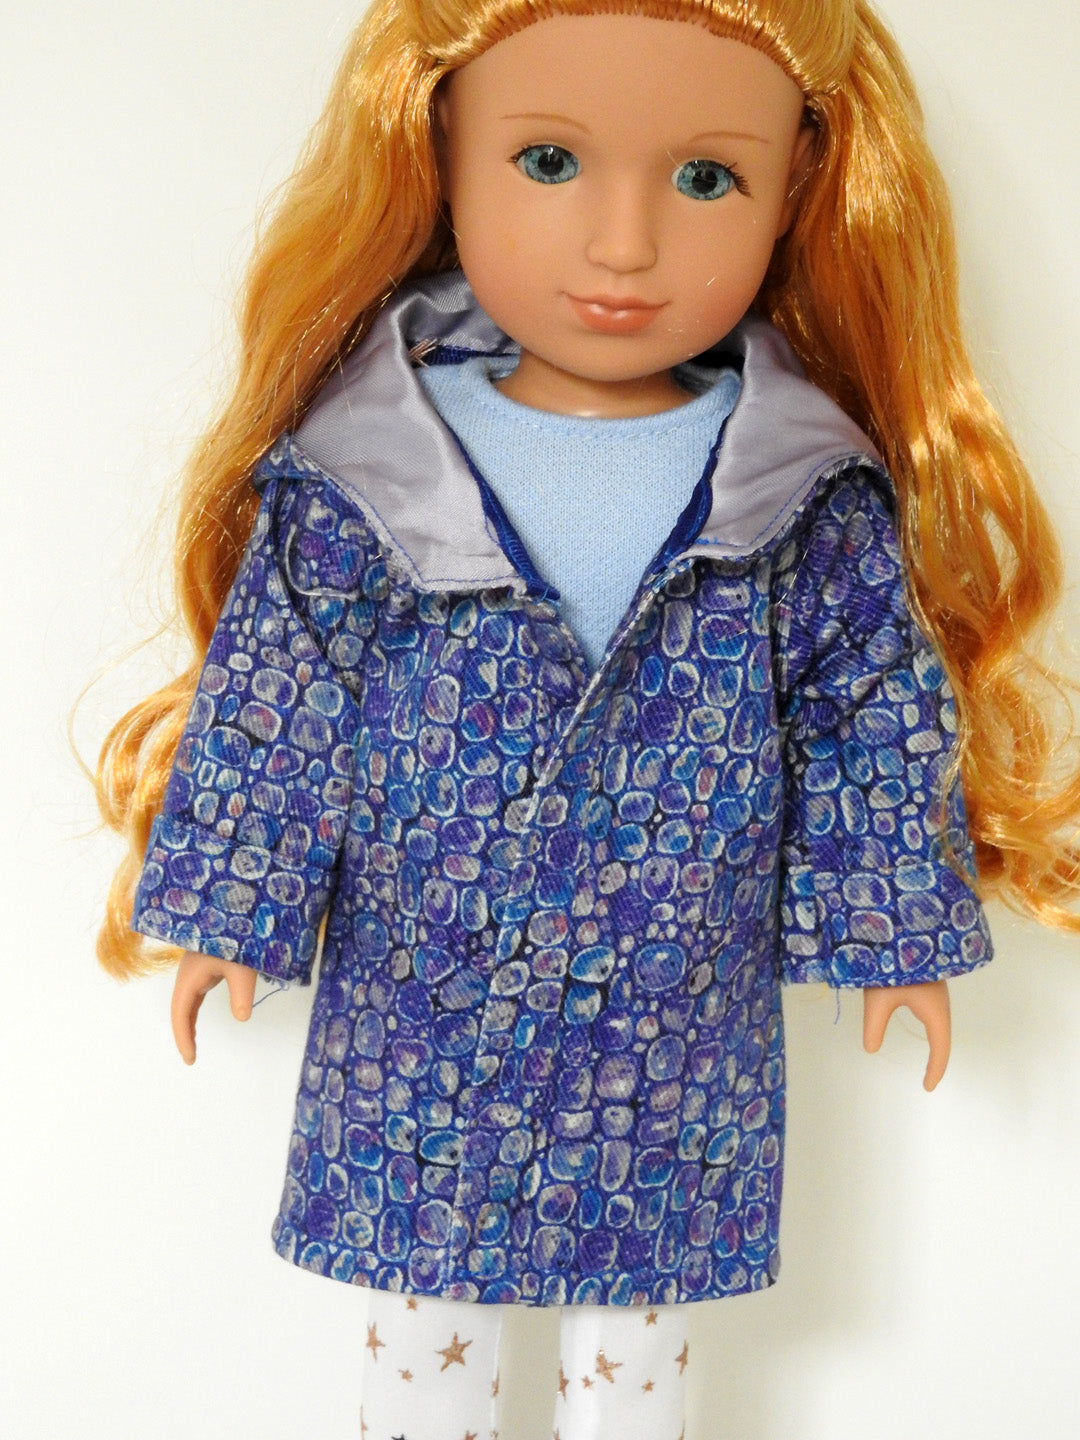 Copy of 14 Inch Doll Hooded Coat for Wellie Wishers Dolls – Avanna Girl